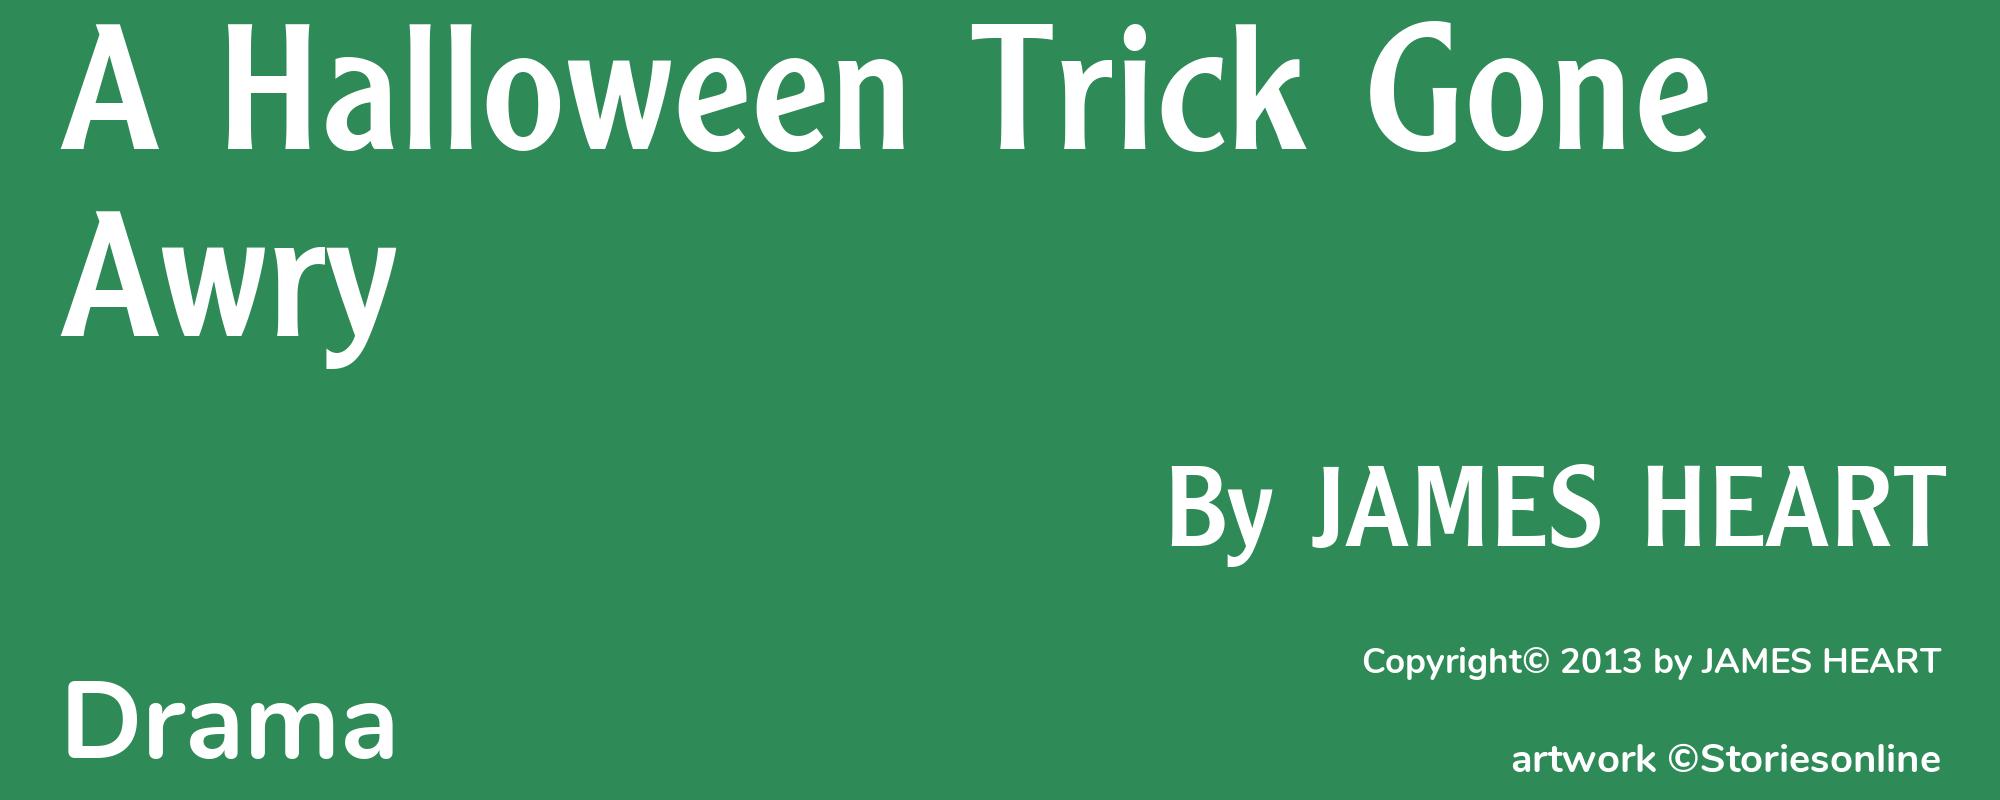 A Halloween Trick Gone Awry - Cover